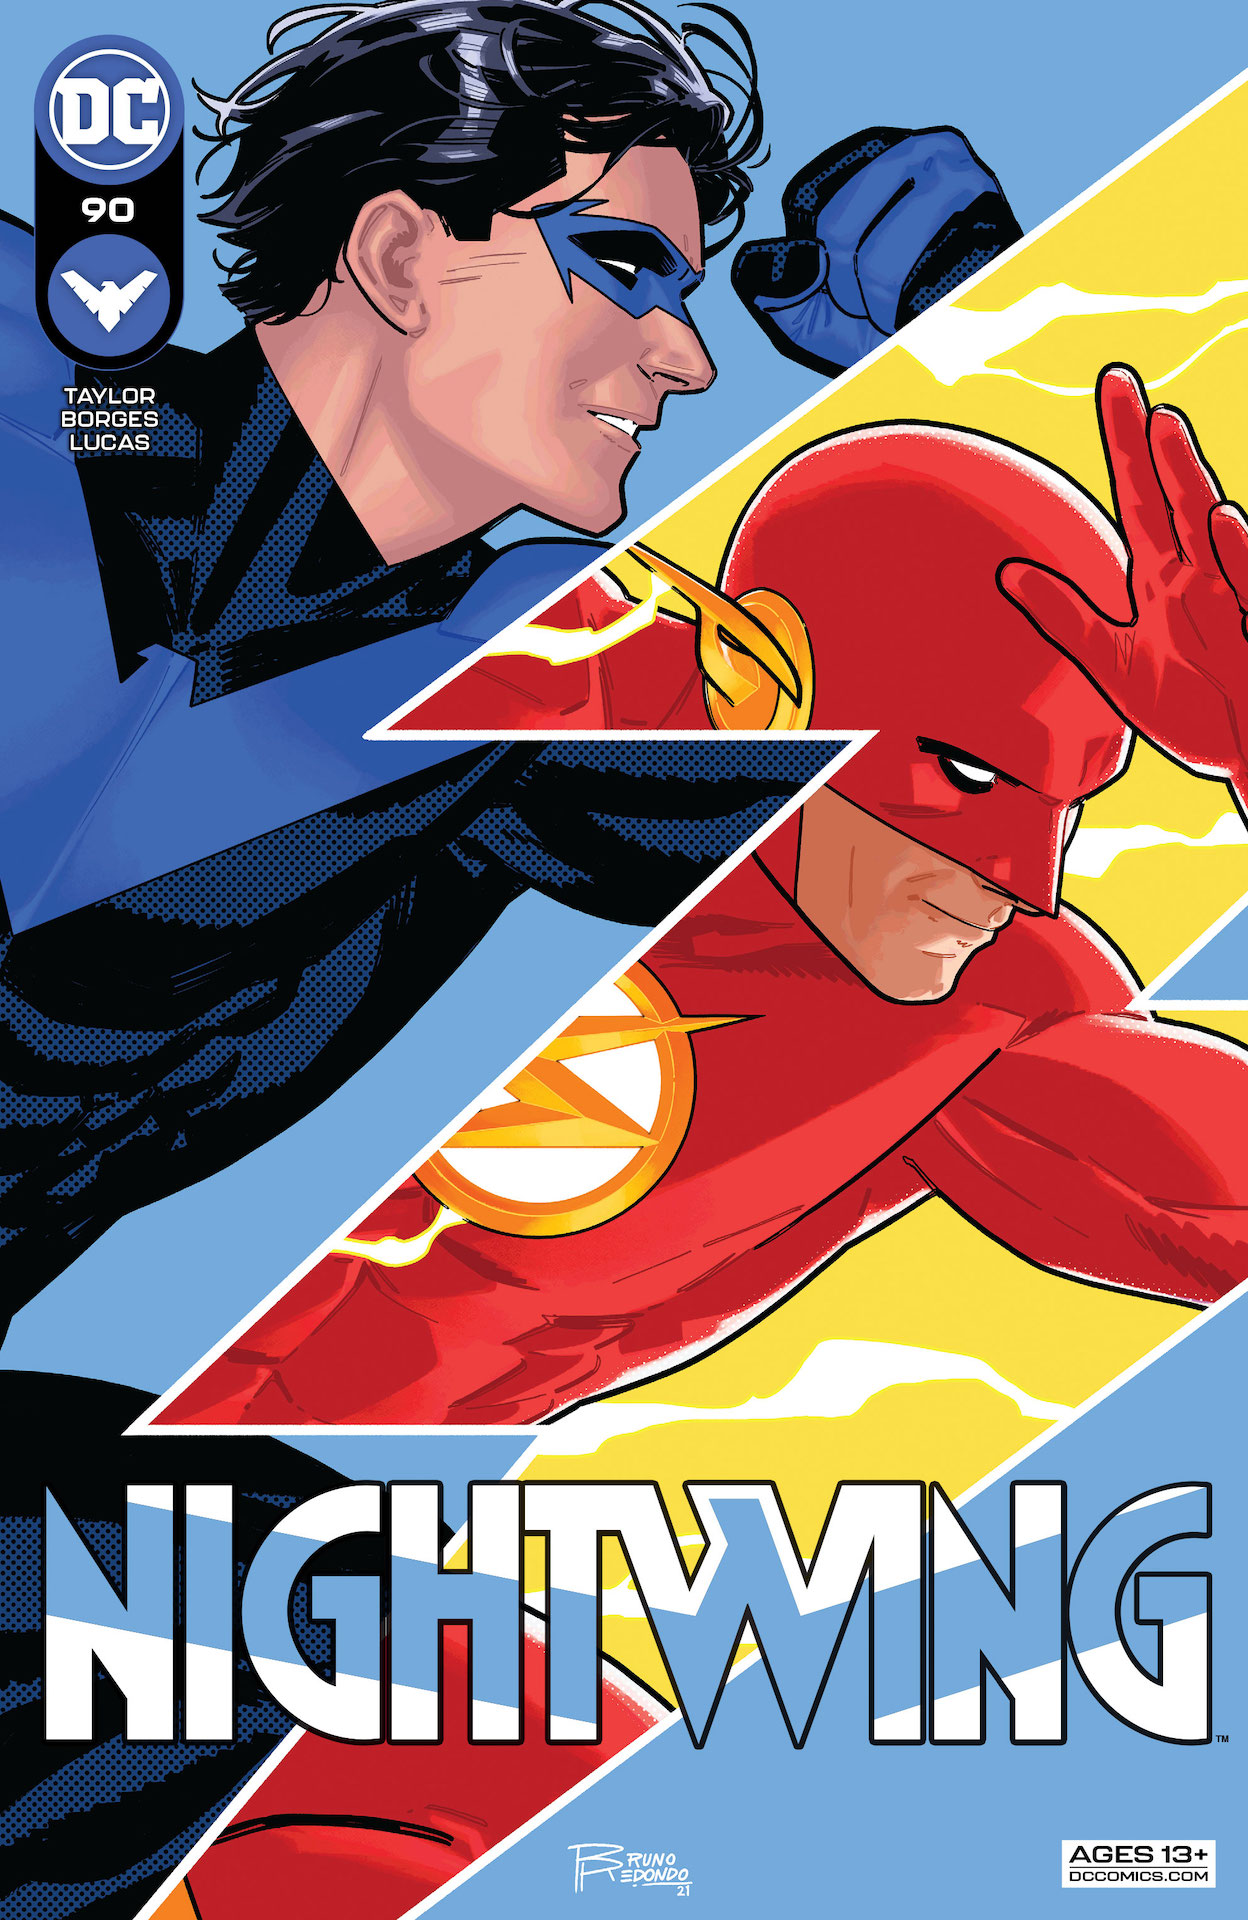 DC Preview: Nightwing #90